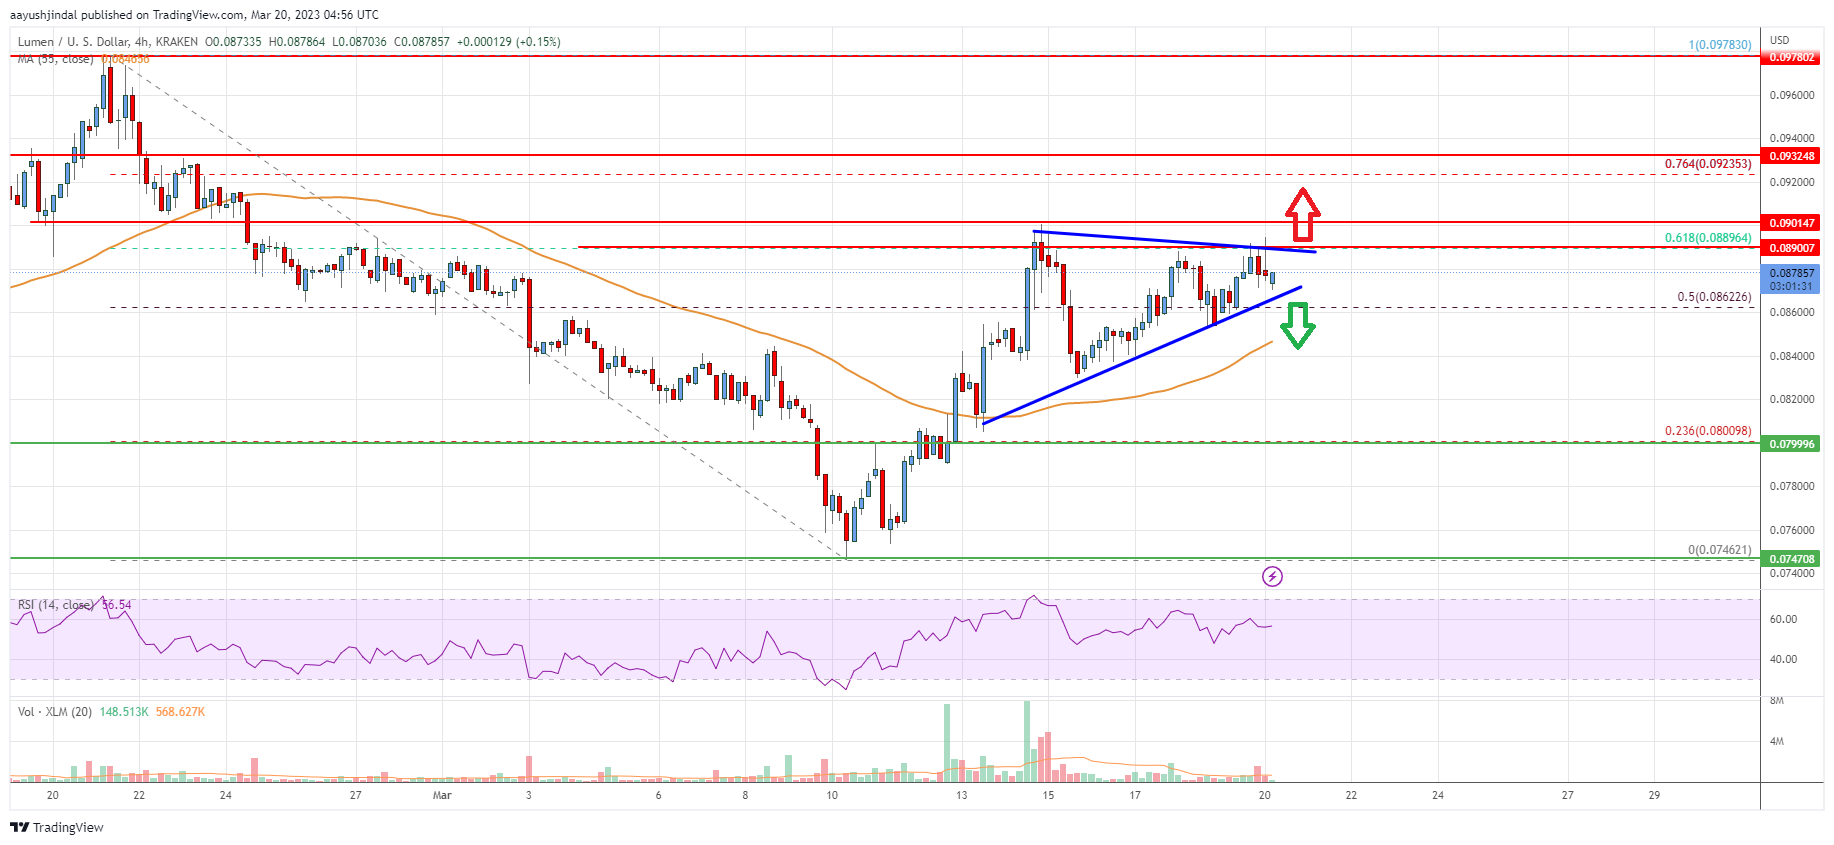 Stellar Lumen (XLM) Price Could Rally If It Clears This Resistance